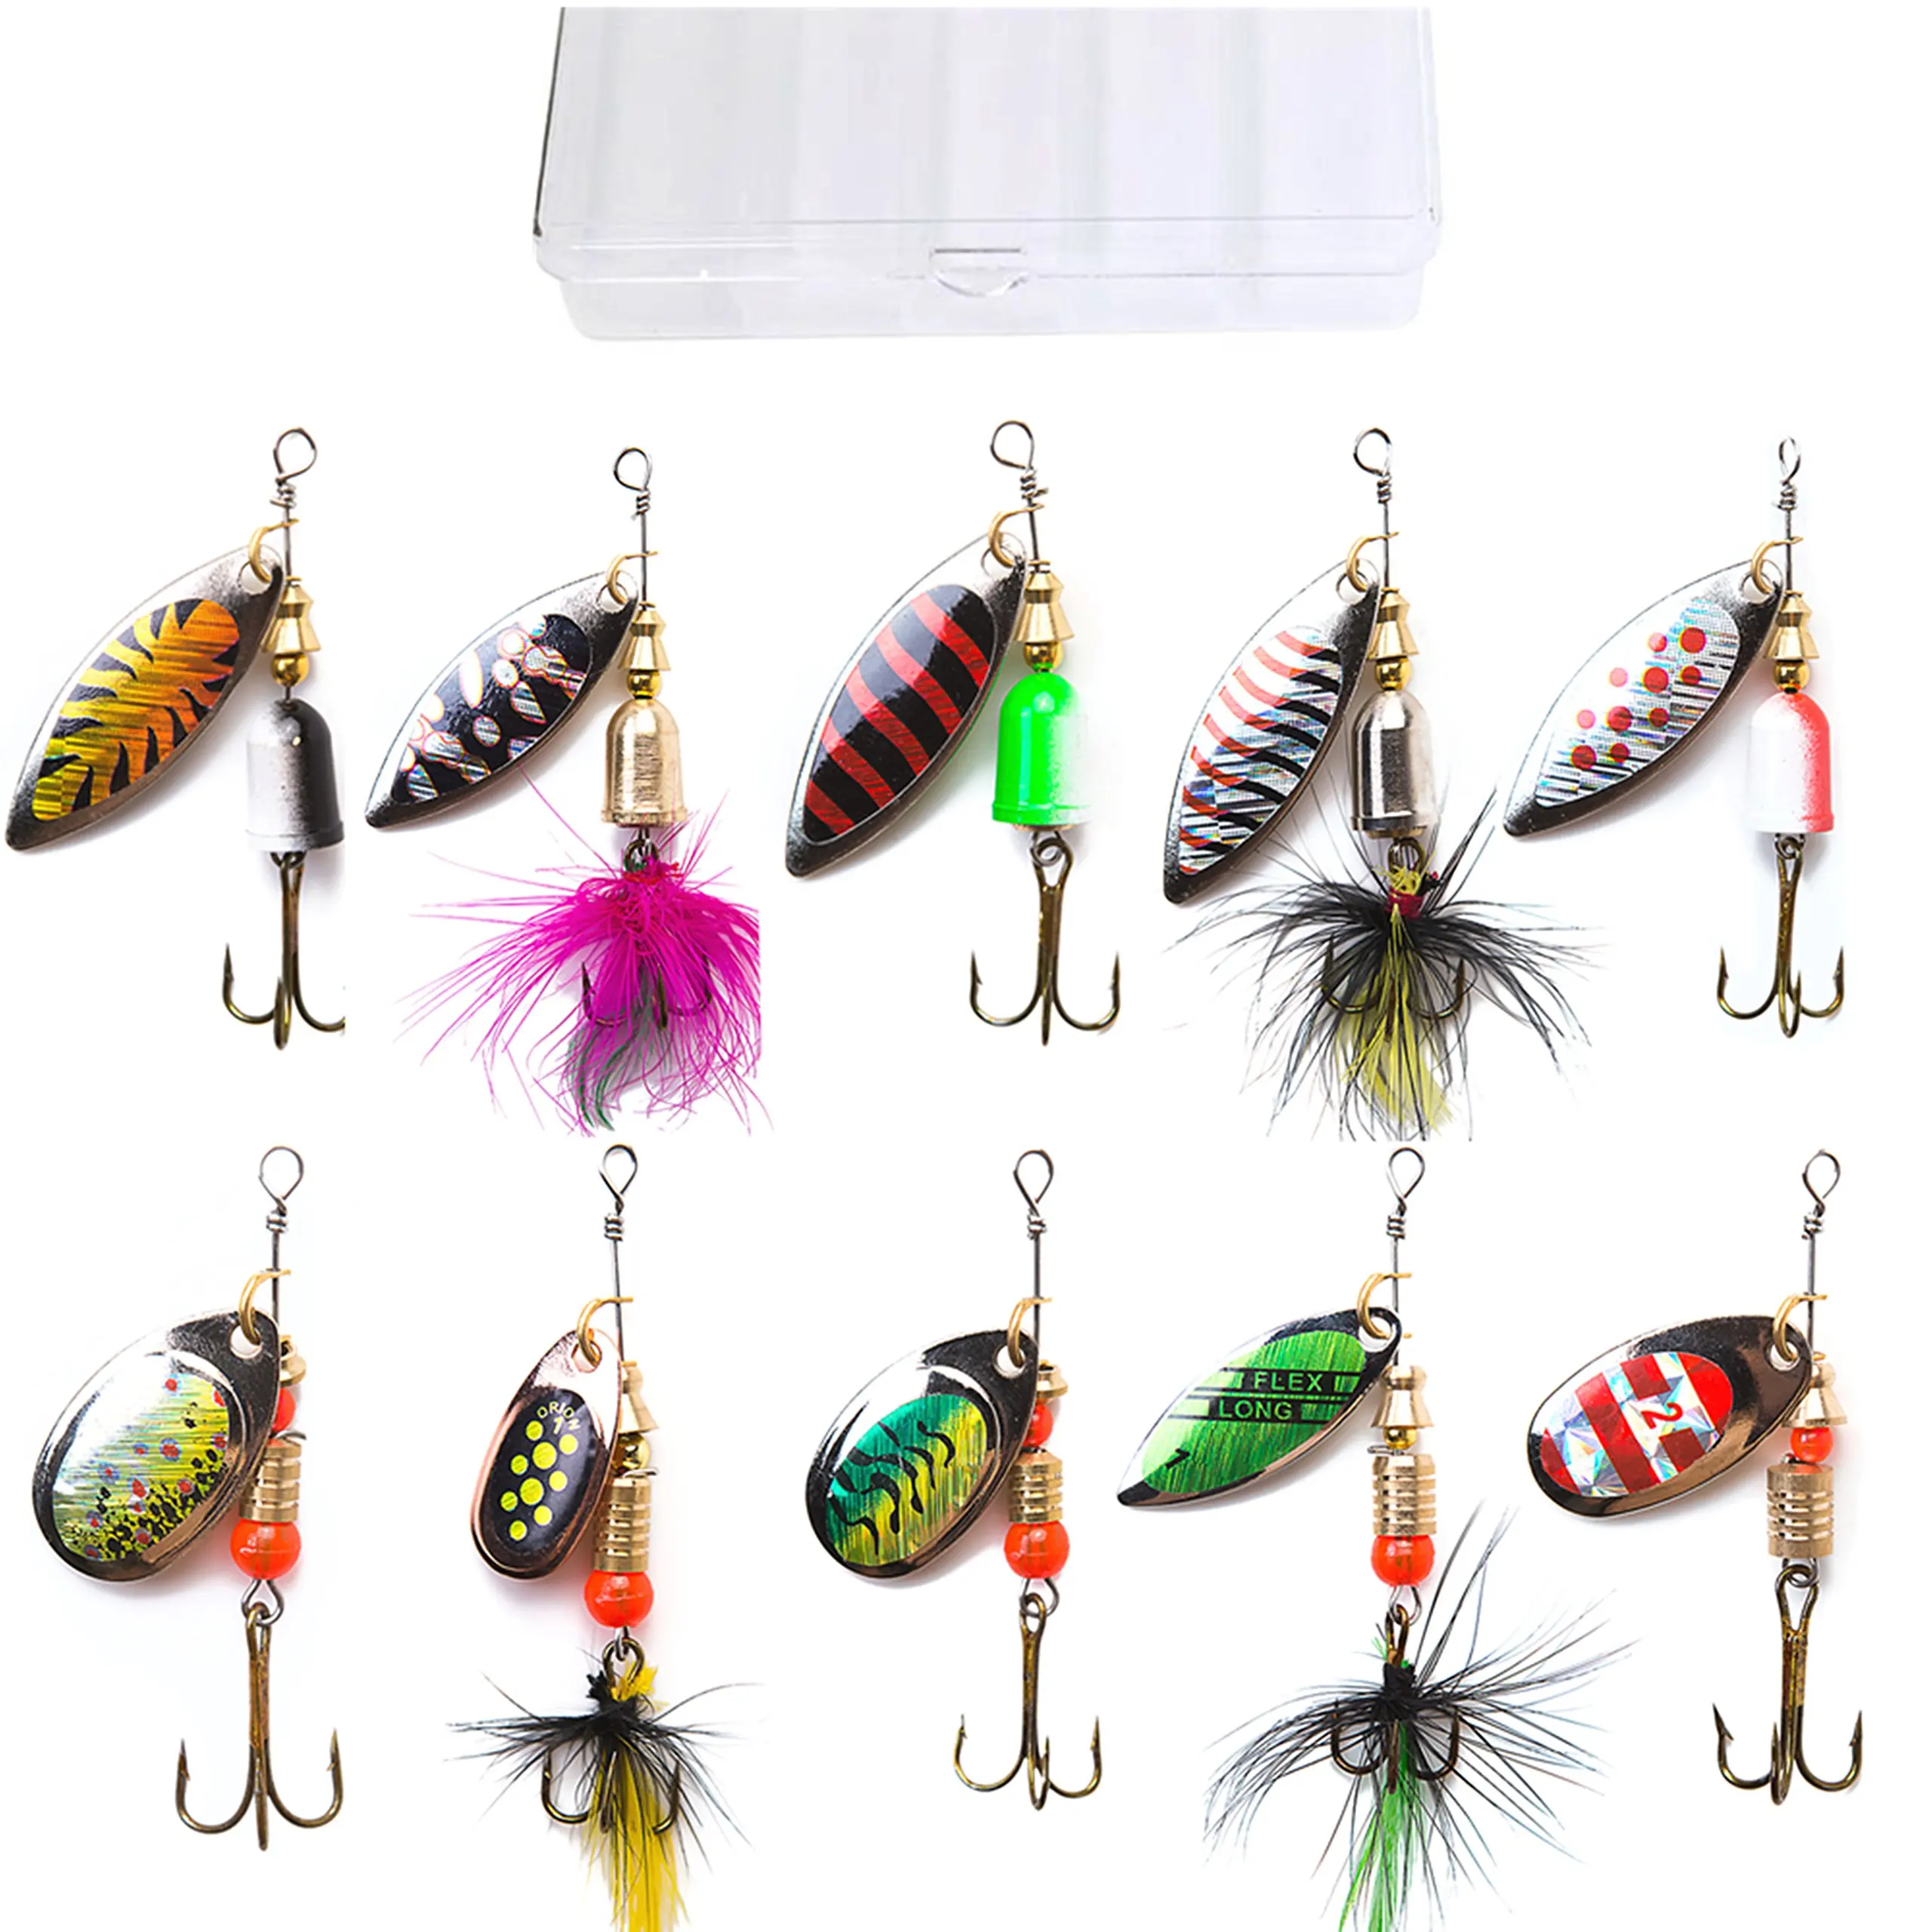 10pcs Fishing Lures Spinnerbait for Bass Trout Salmon Walleye Hard Metal Spinner  Baits Kit with Tackle Box Fishing accessories - AliExpress